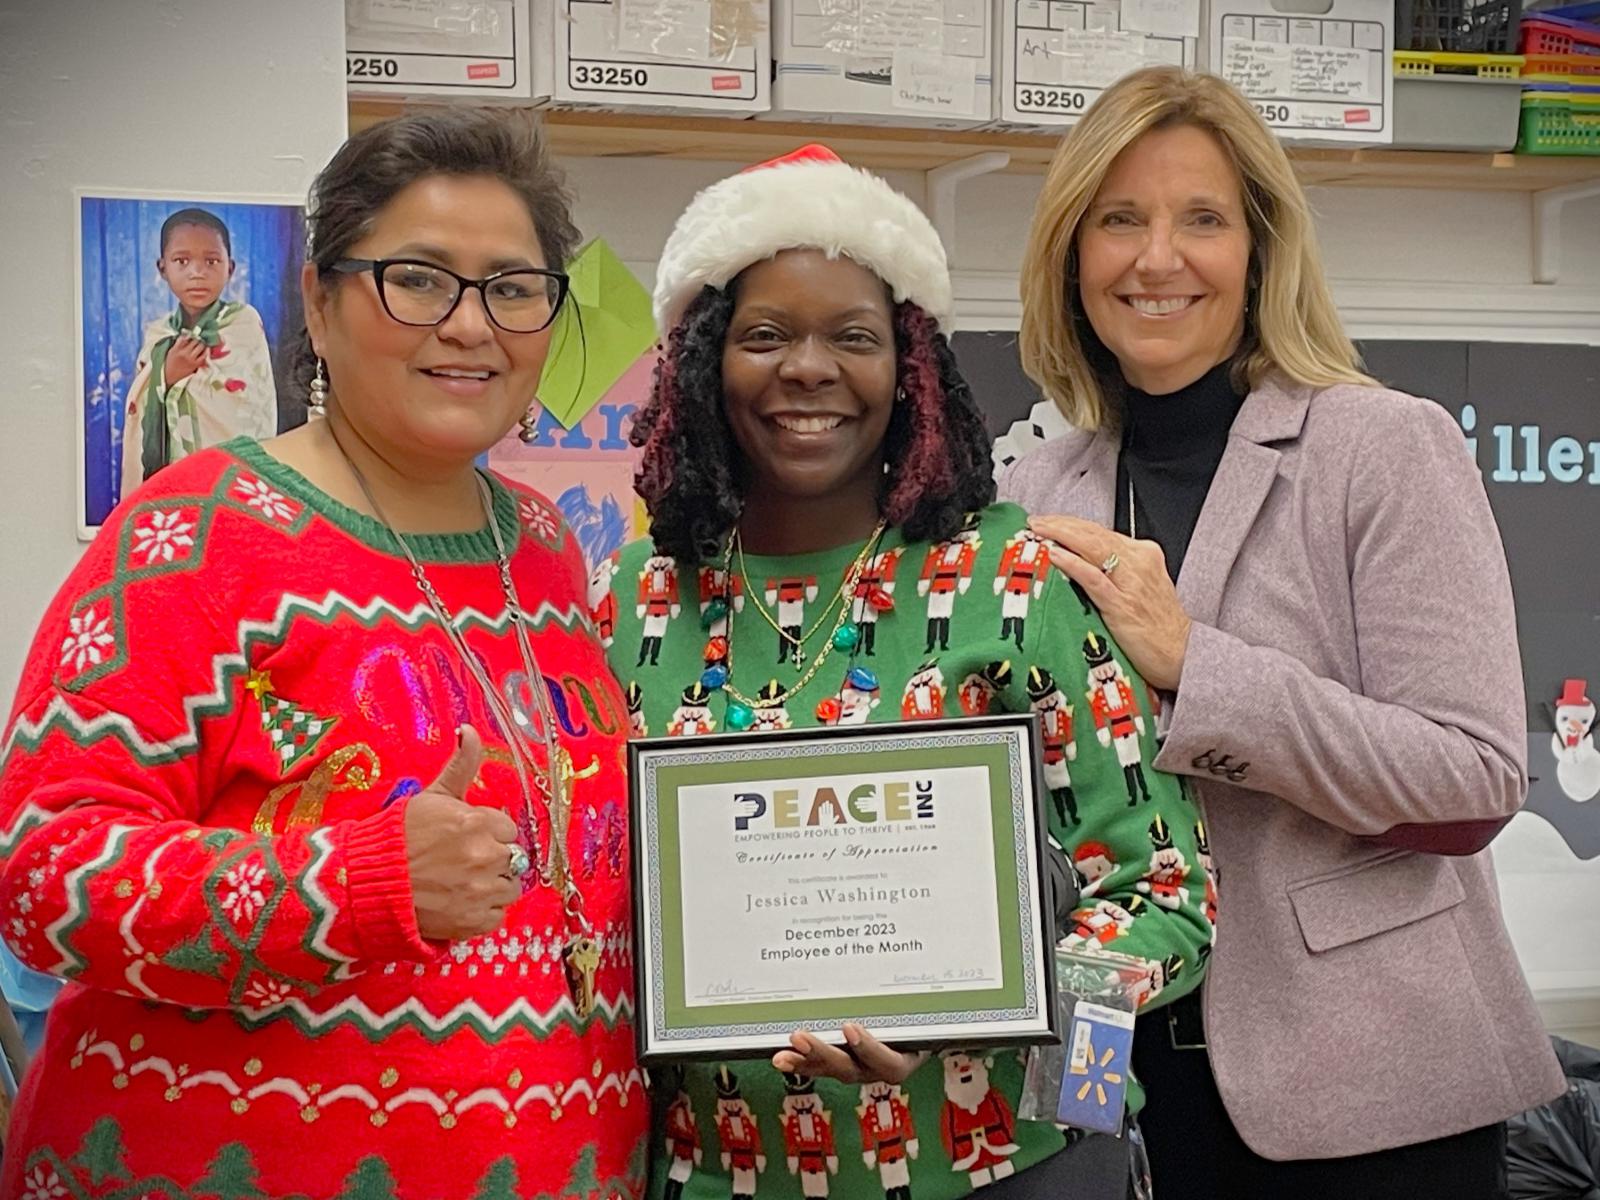 Employee of the Month Jessica Washington, with (left to right) Merrick Site Supervisor Sharon Bean and Executive Director Carolyn Brown